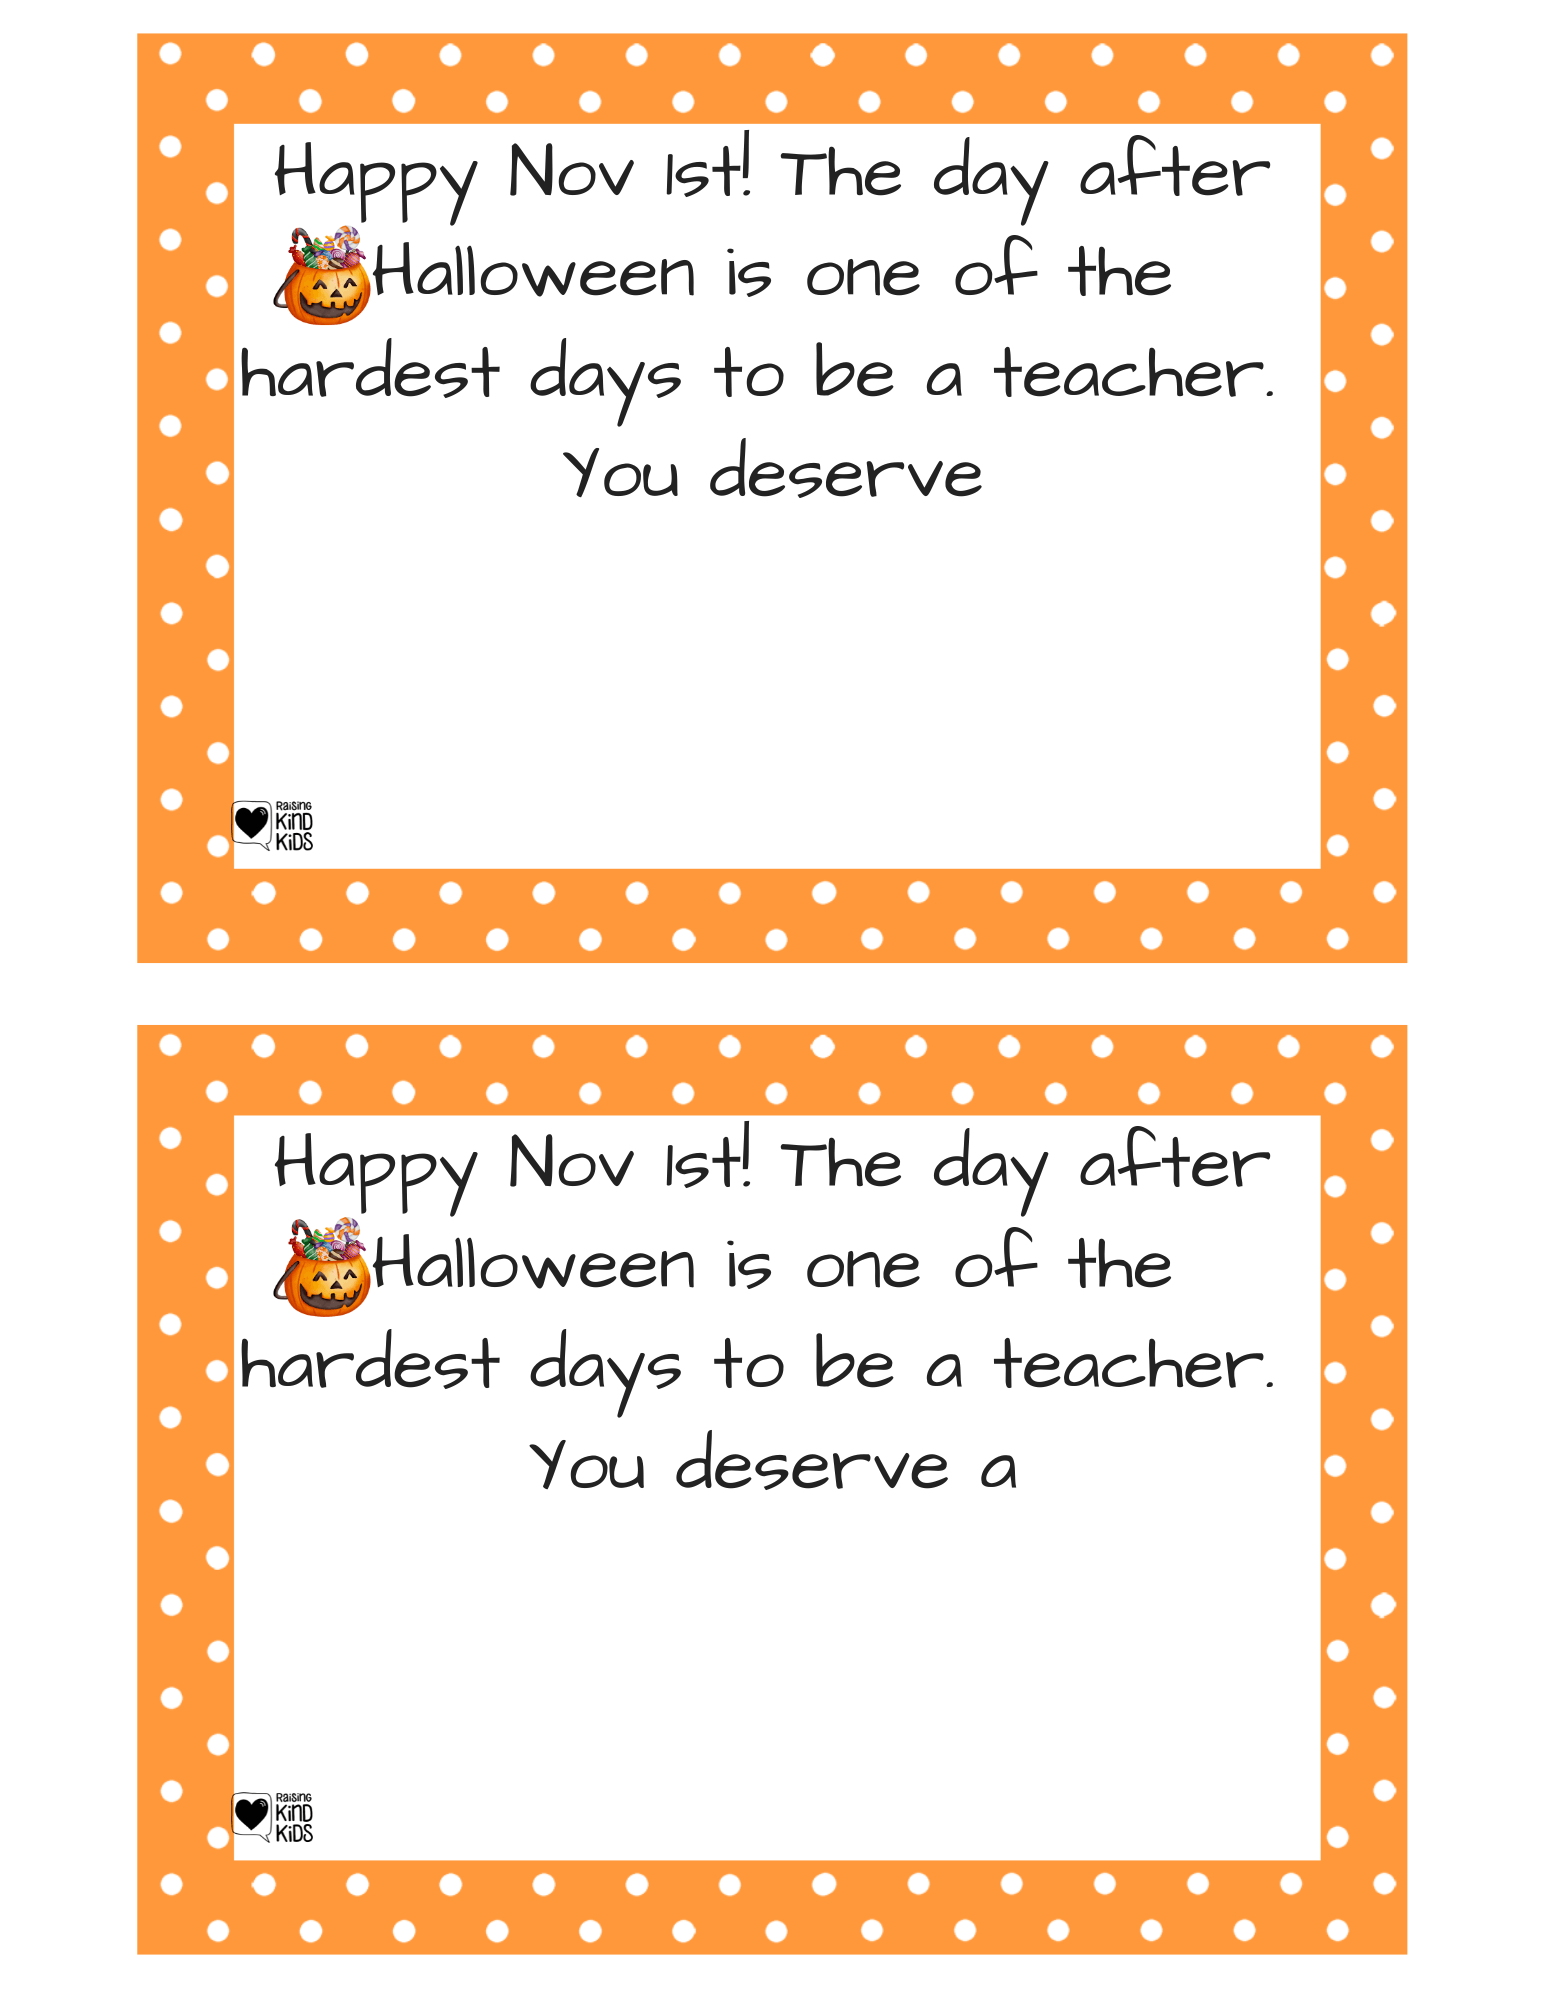 Thank a teacher with this card to give them on November 1st because the day after Halloween is the hardest day to teach.